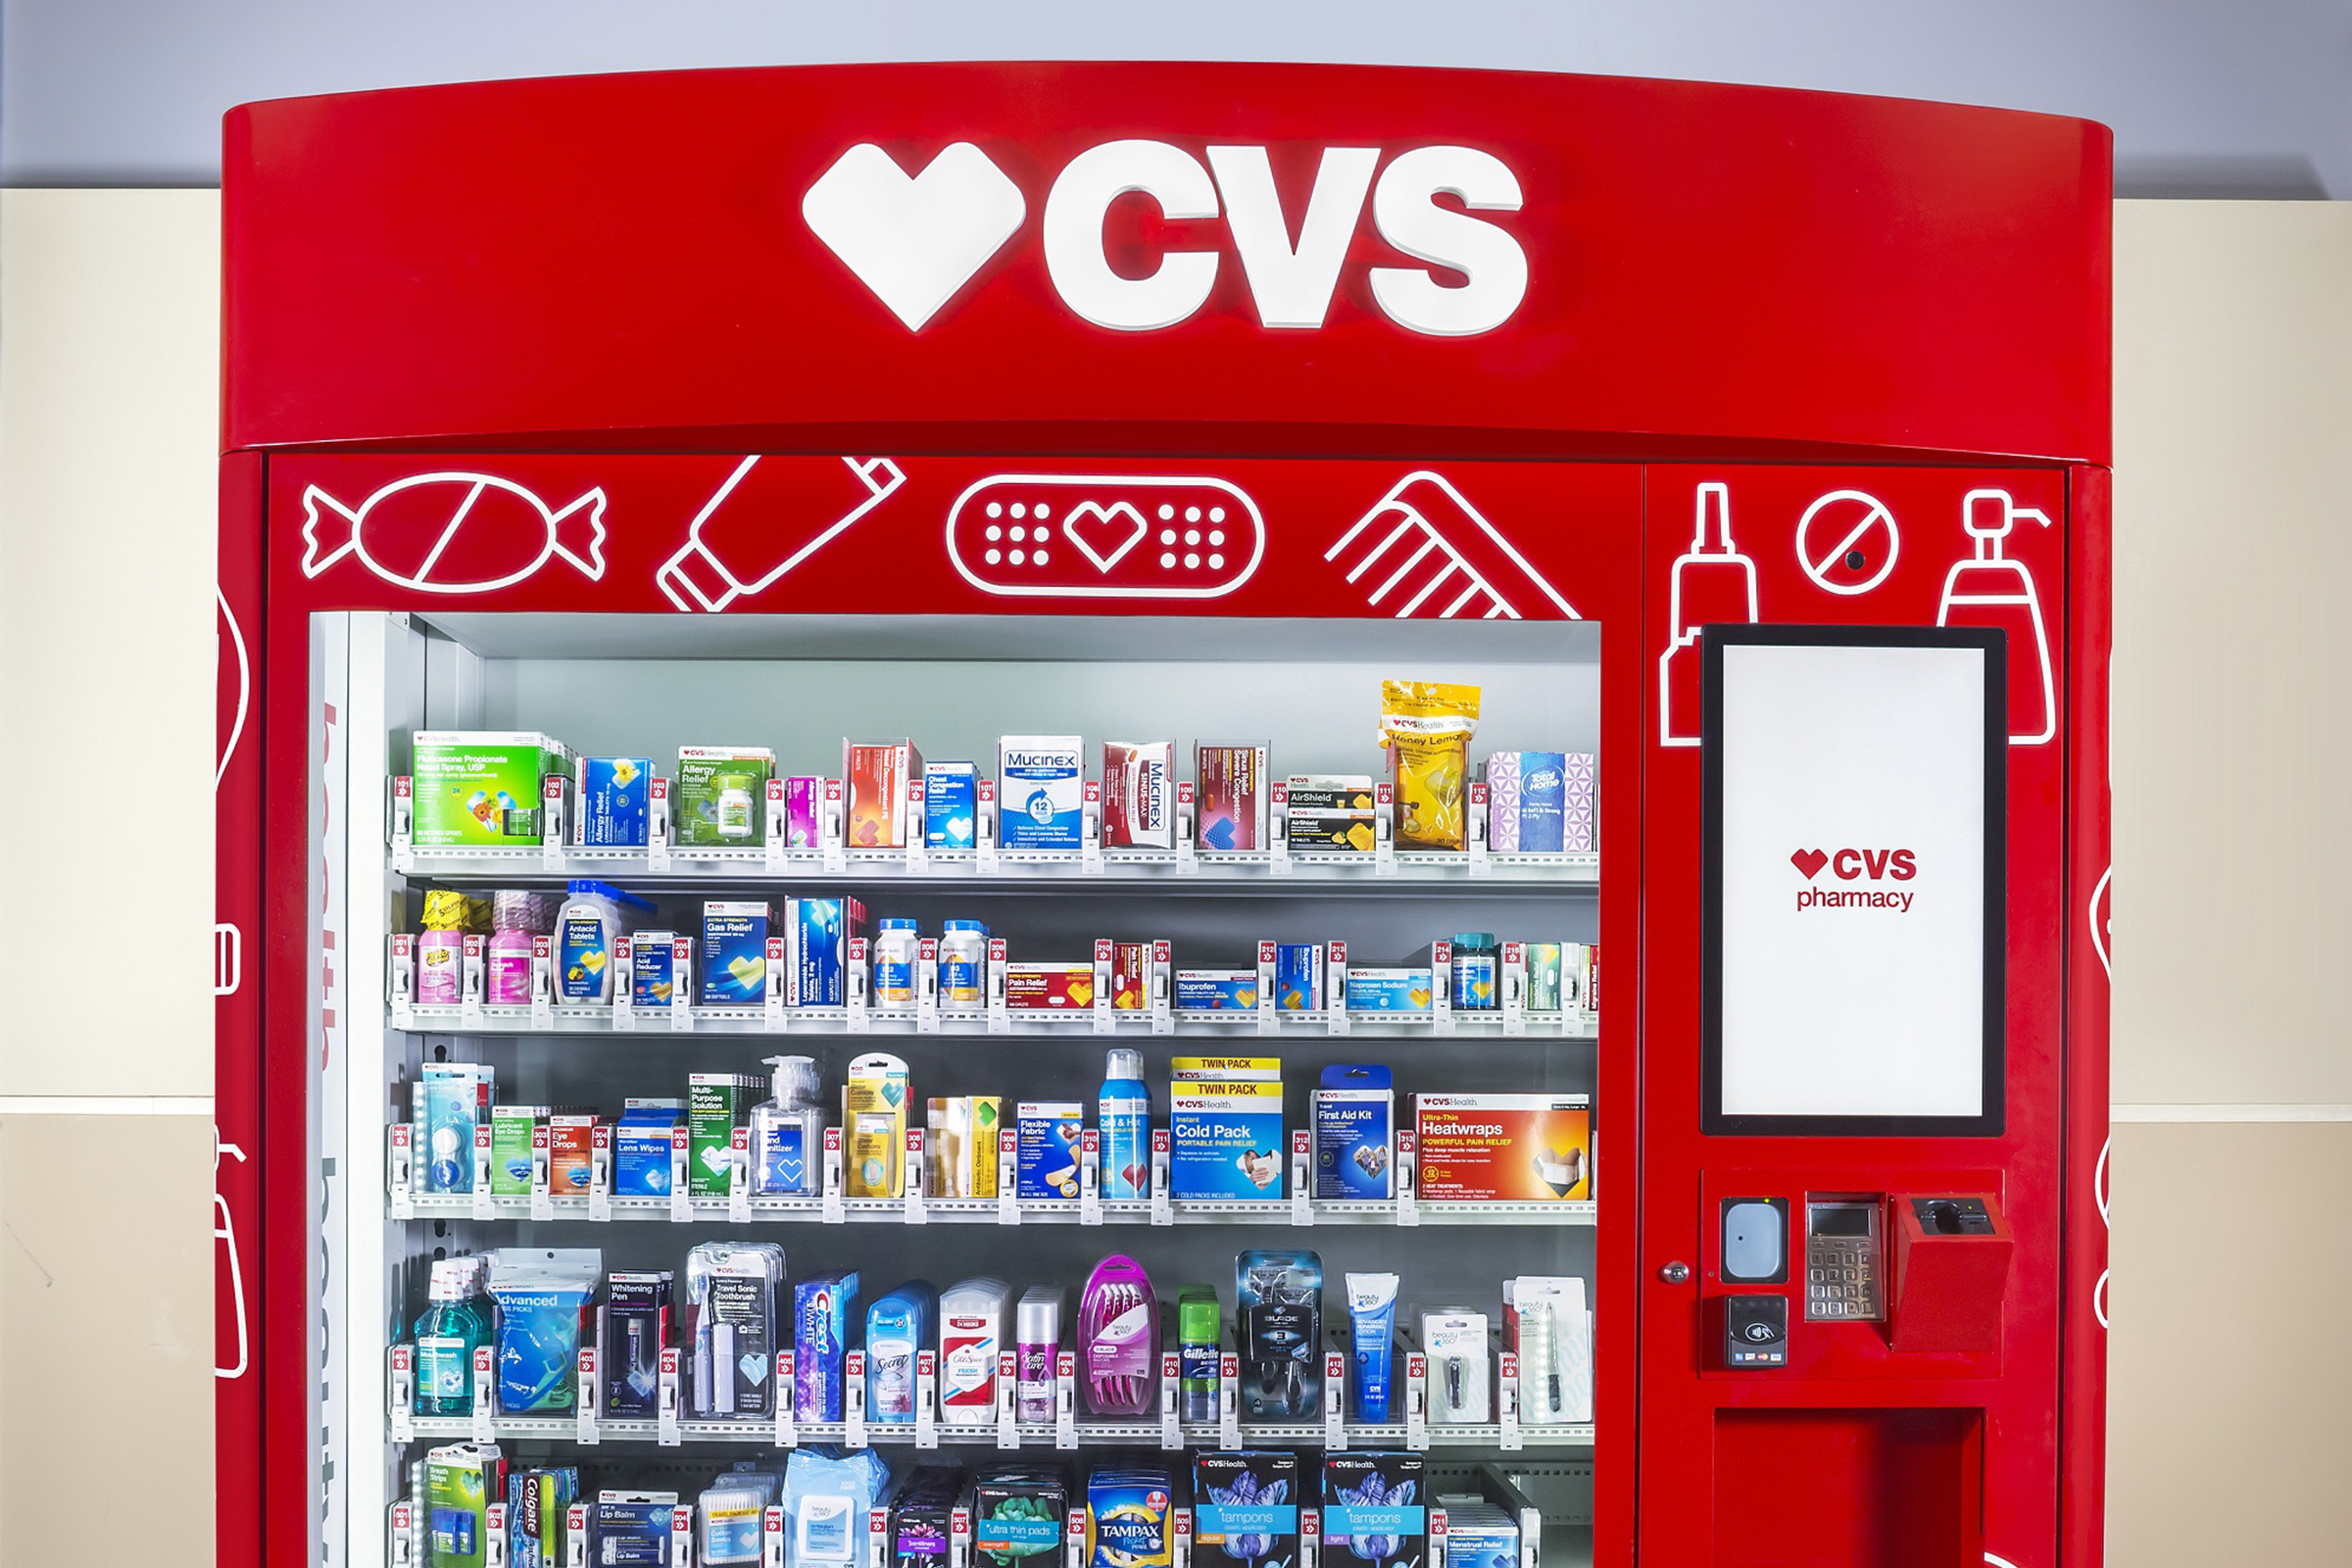 “The pharmacy is becoming more convenient than a convenience store”